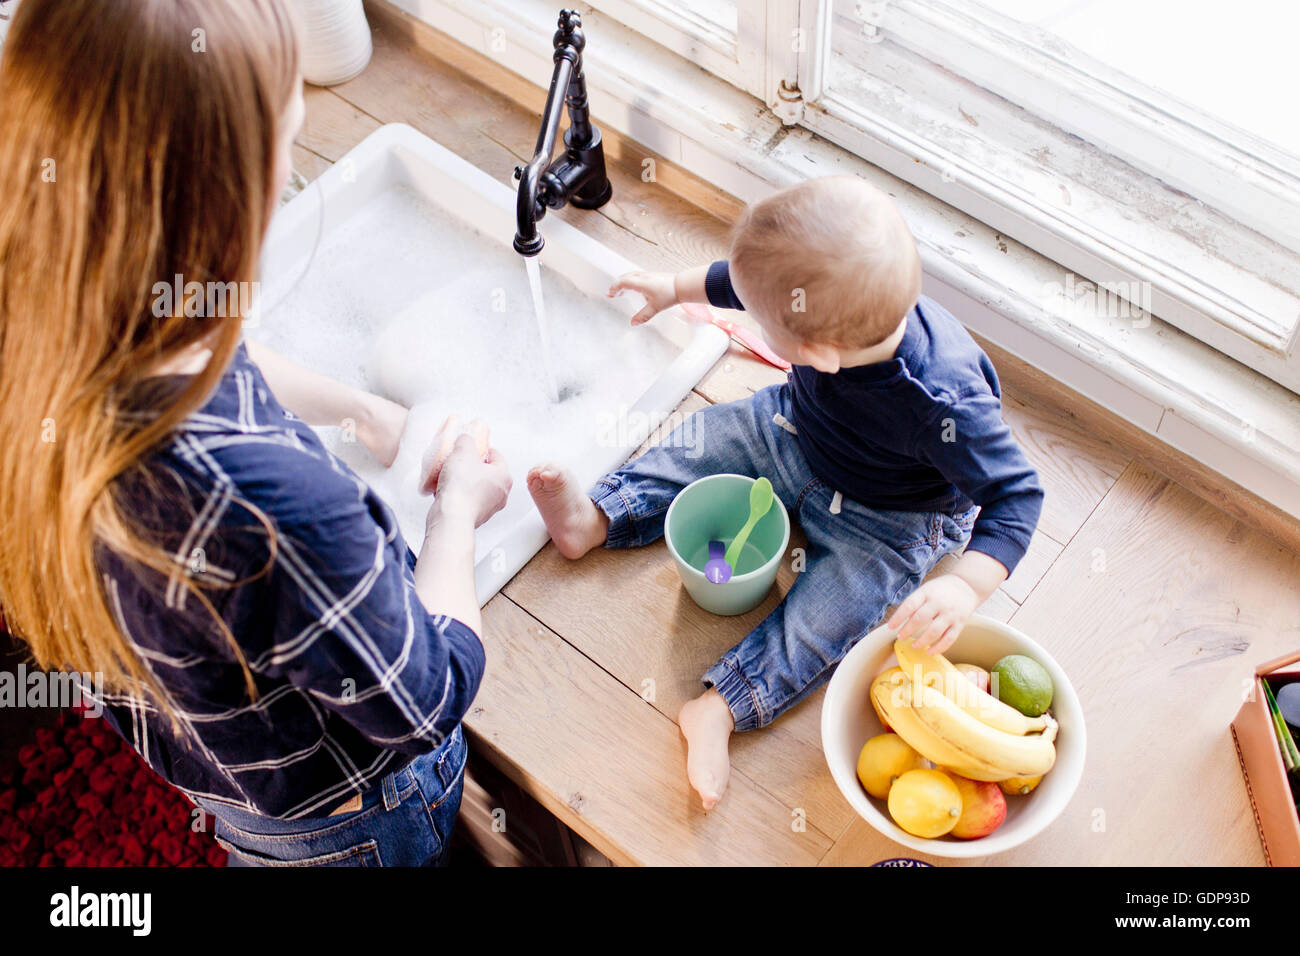 Overhead view of woman at kitchen sink with baby son Stock Photo